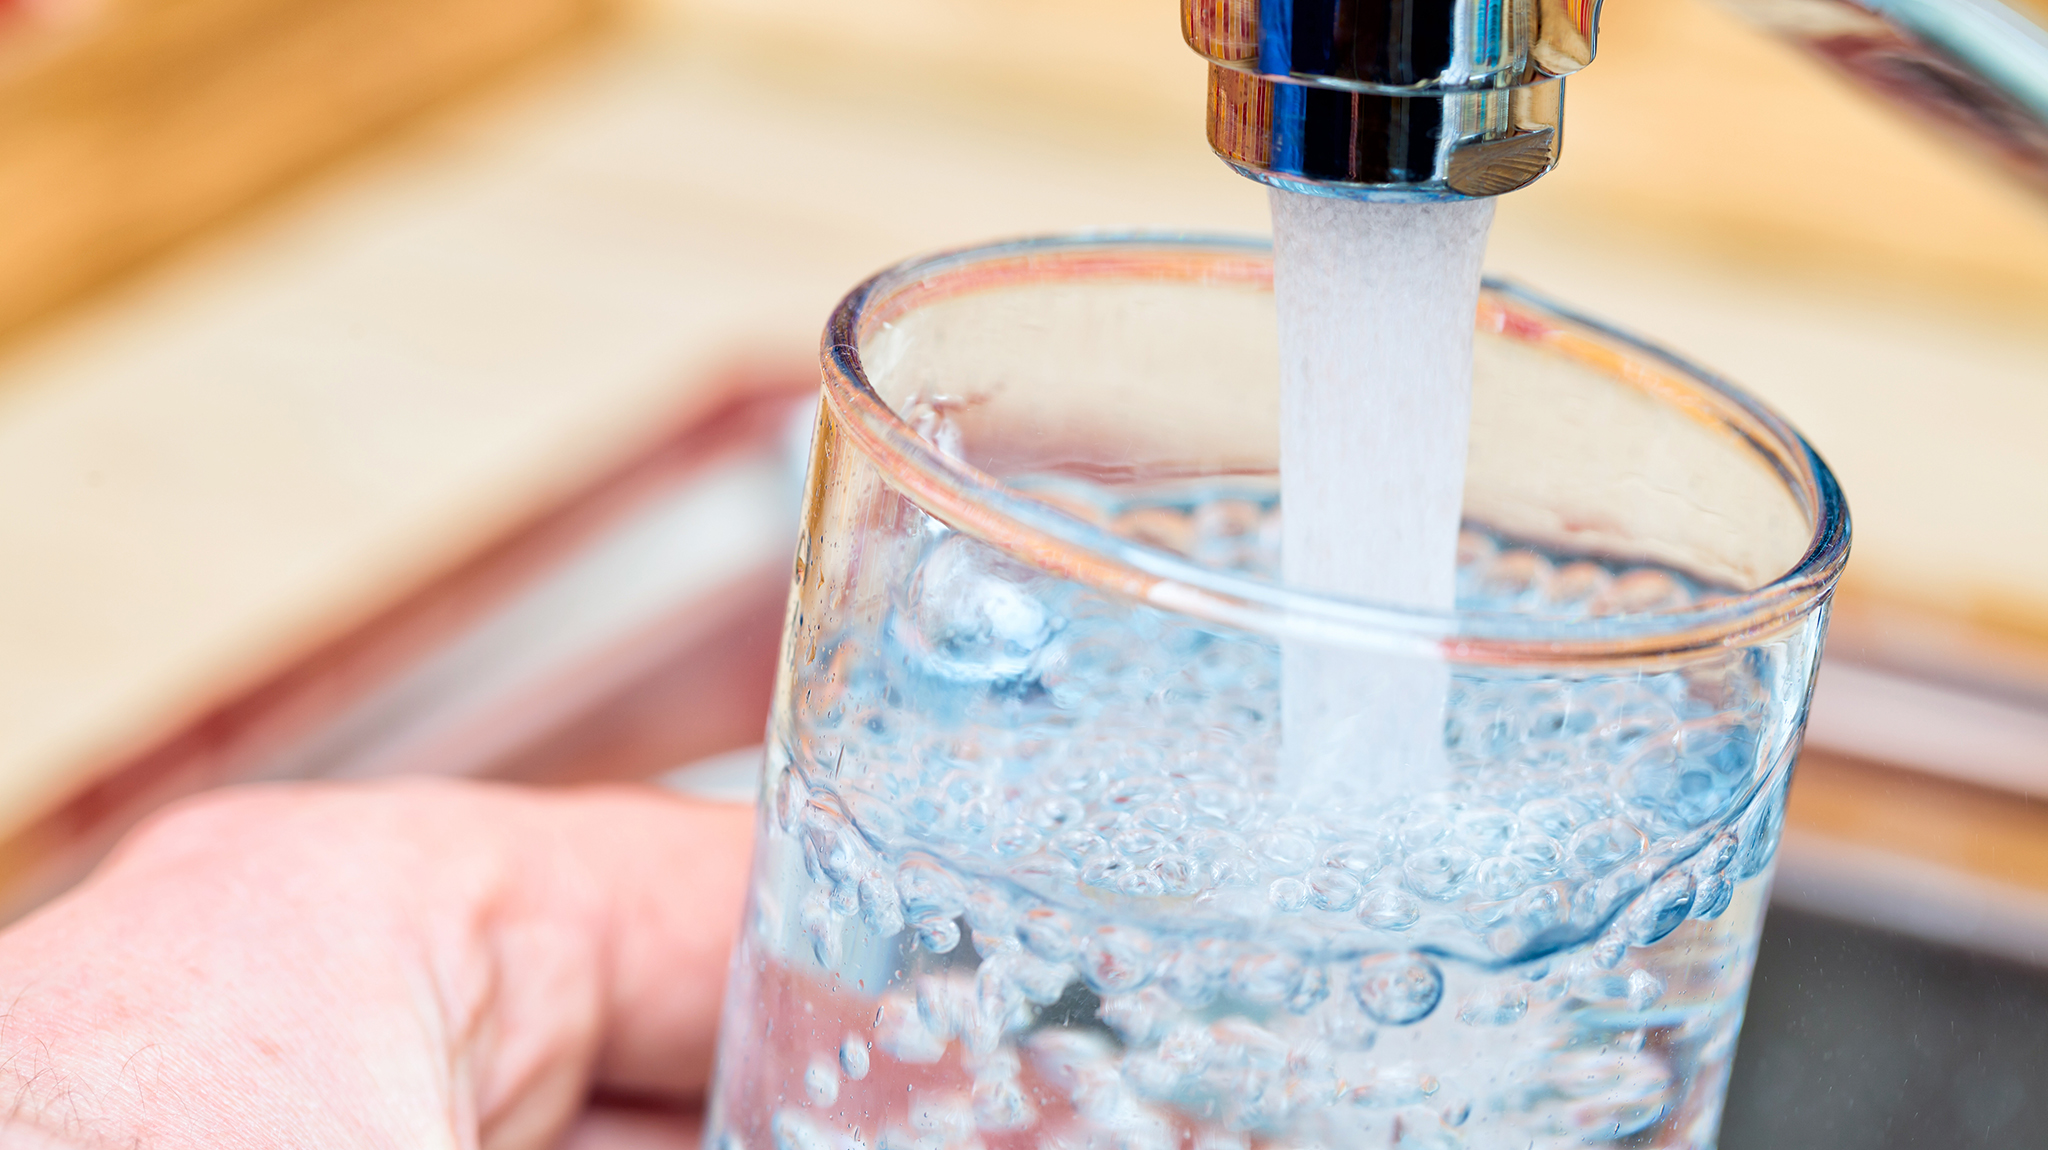 Researchers Tackle Challenges of Safe Drinking Water in Mississippi - Ole Miss News